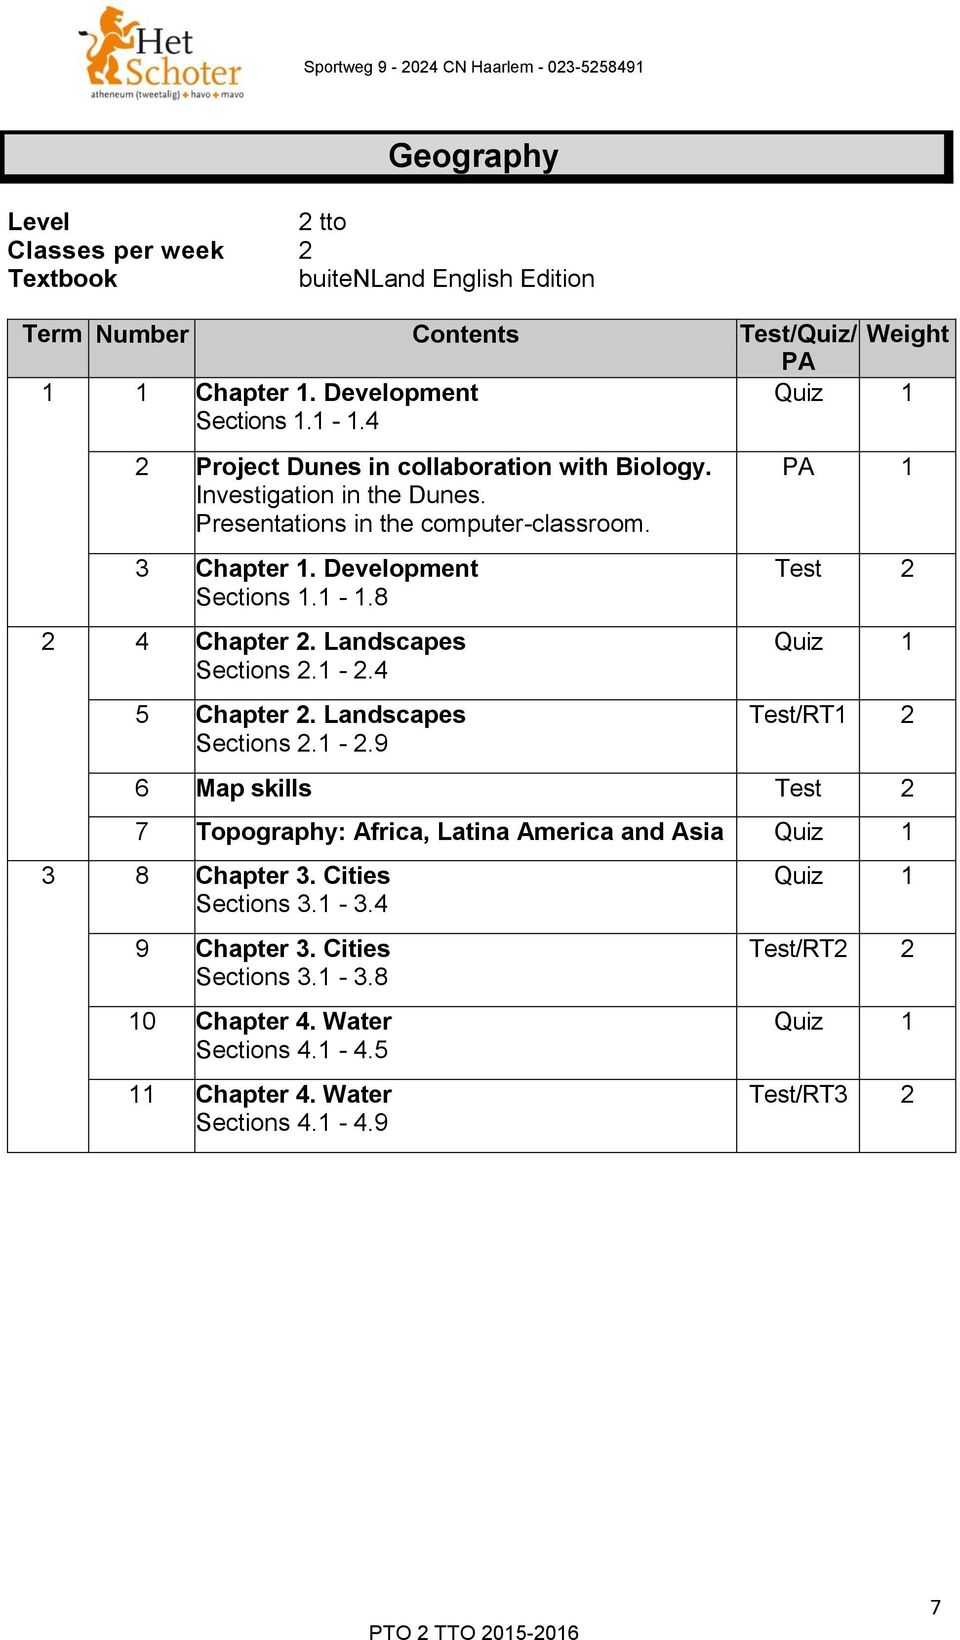 8 4 Chapter. Landscapes Sections. -.4 5 Chapter. Landscapes Sections. -.9 Test Quiz Test/RT 6 Map skills Test 7 Topography: Africa, Latina America and Asia Quiz 3 8 Chapter 3.